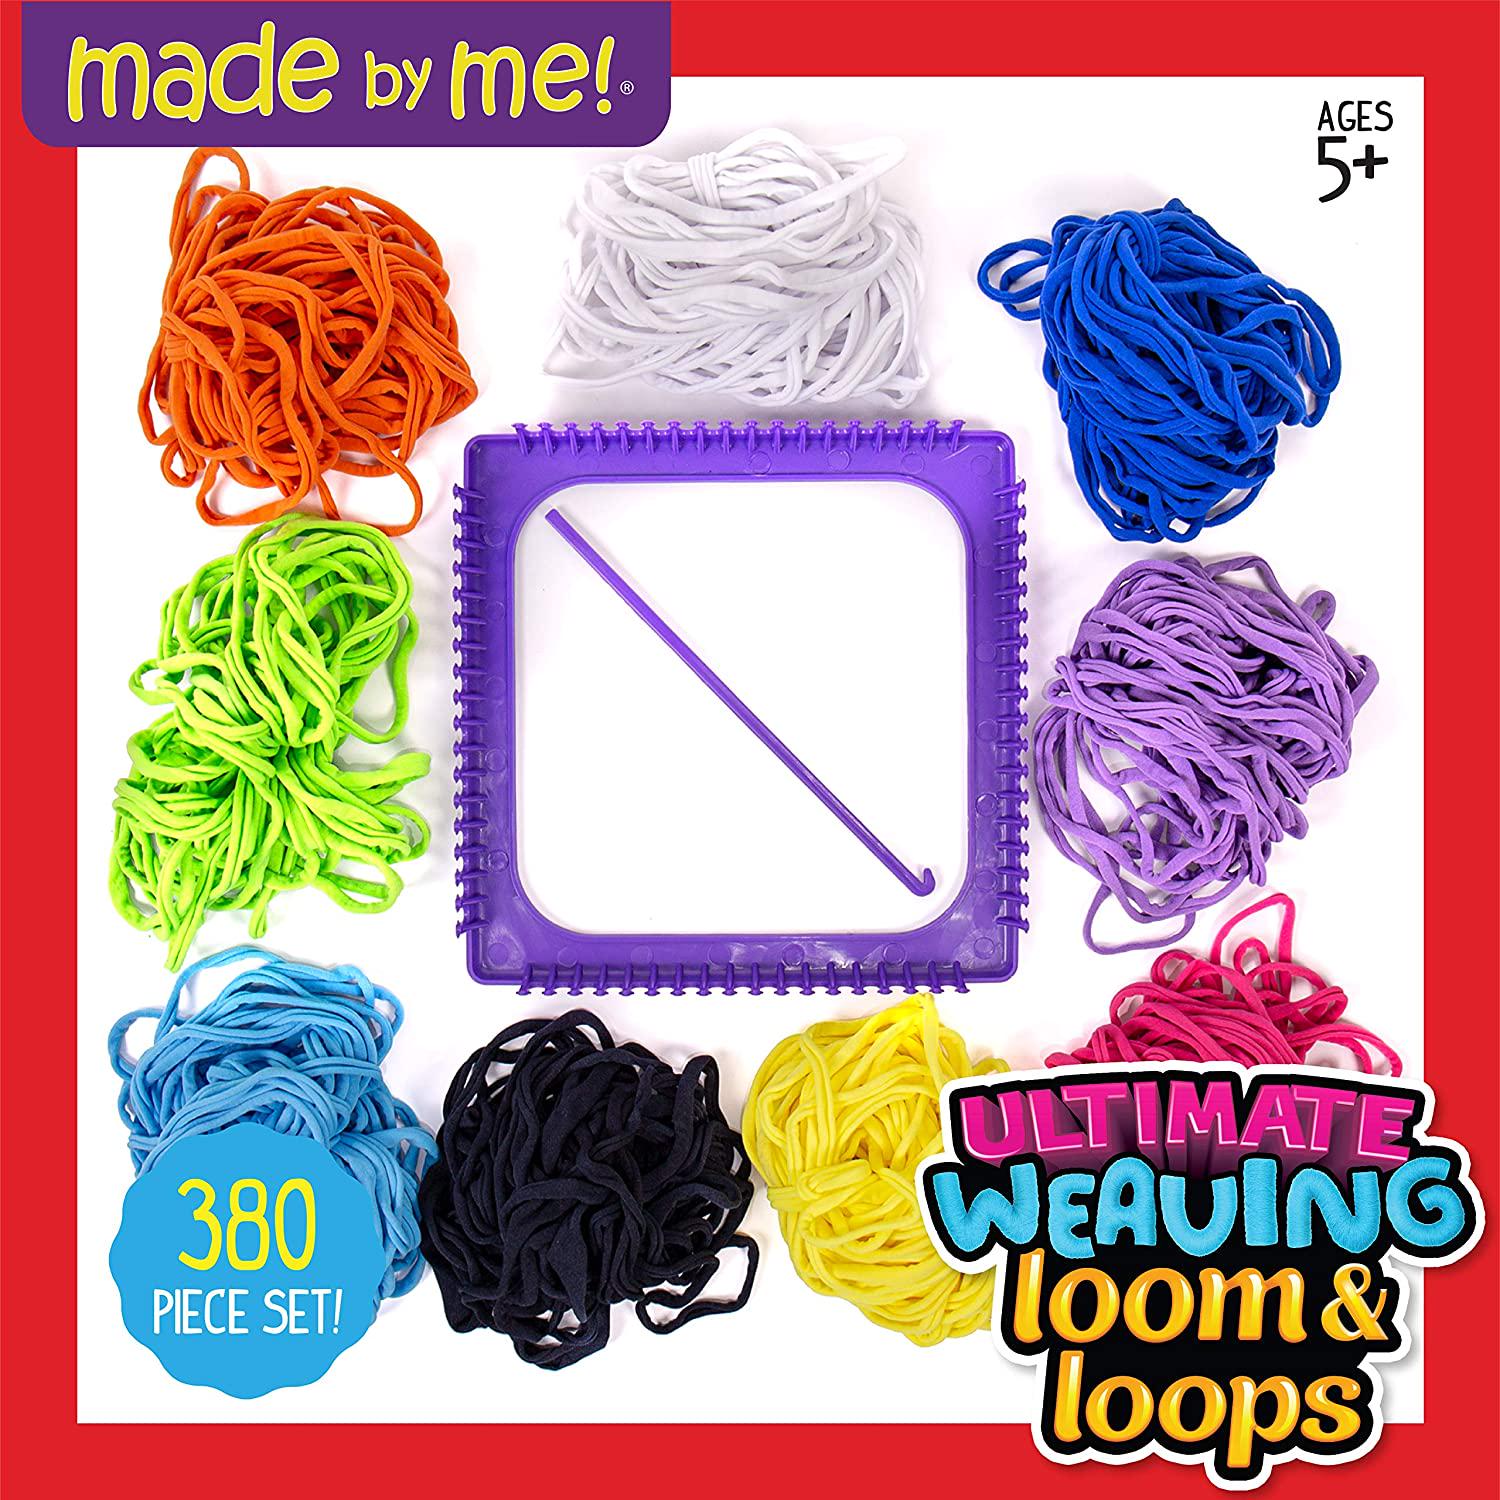 Made By Me, Made By Me 93352 Ultimate Weaving Loom by Horizon Group USA, Includes Over 360 Craft Loops and 1 Weaving Loom ( Exclusive), Multicolor